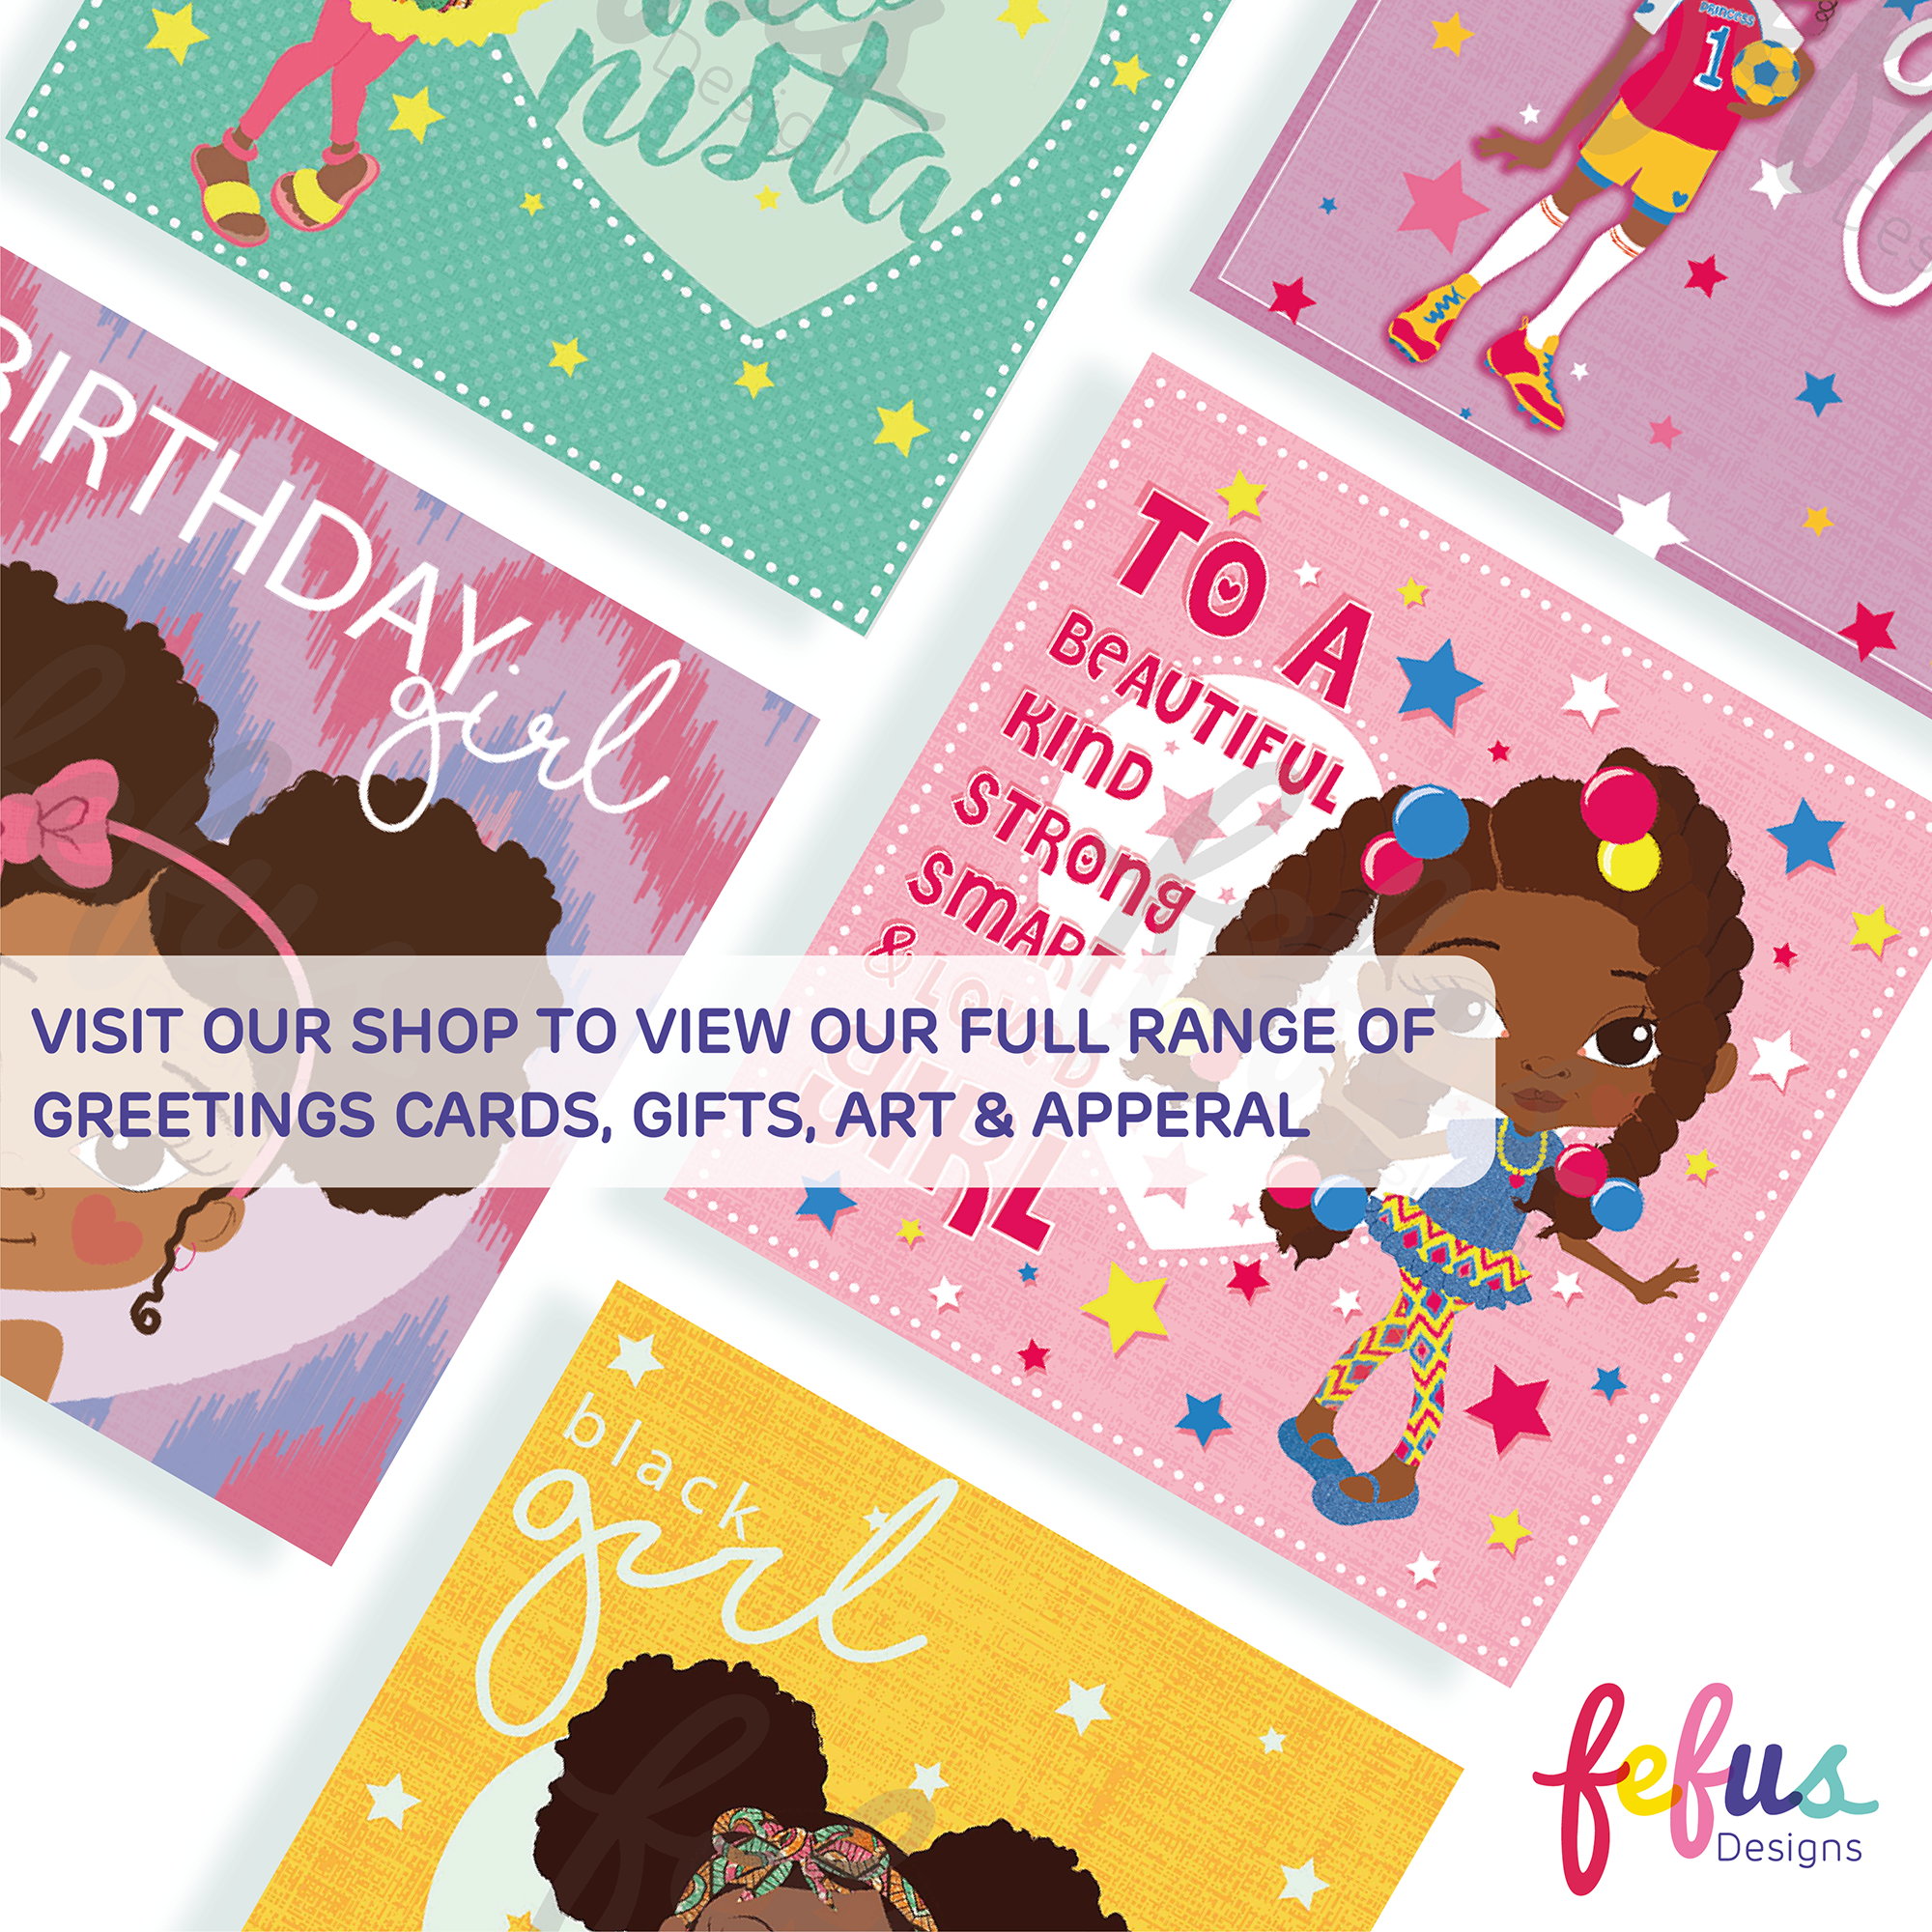 Afronista Ginger - Mixed Race Greetings Card | Fefus designs